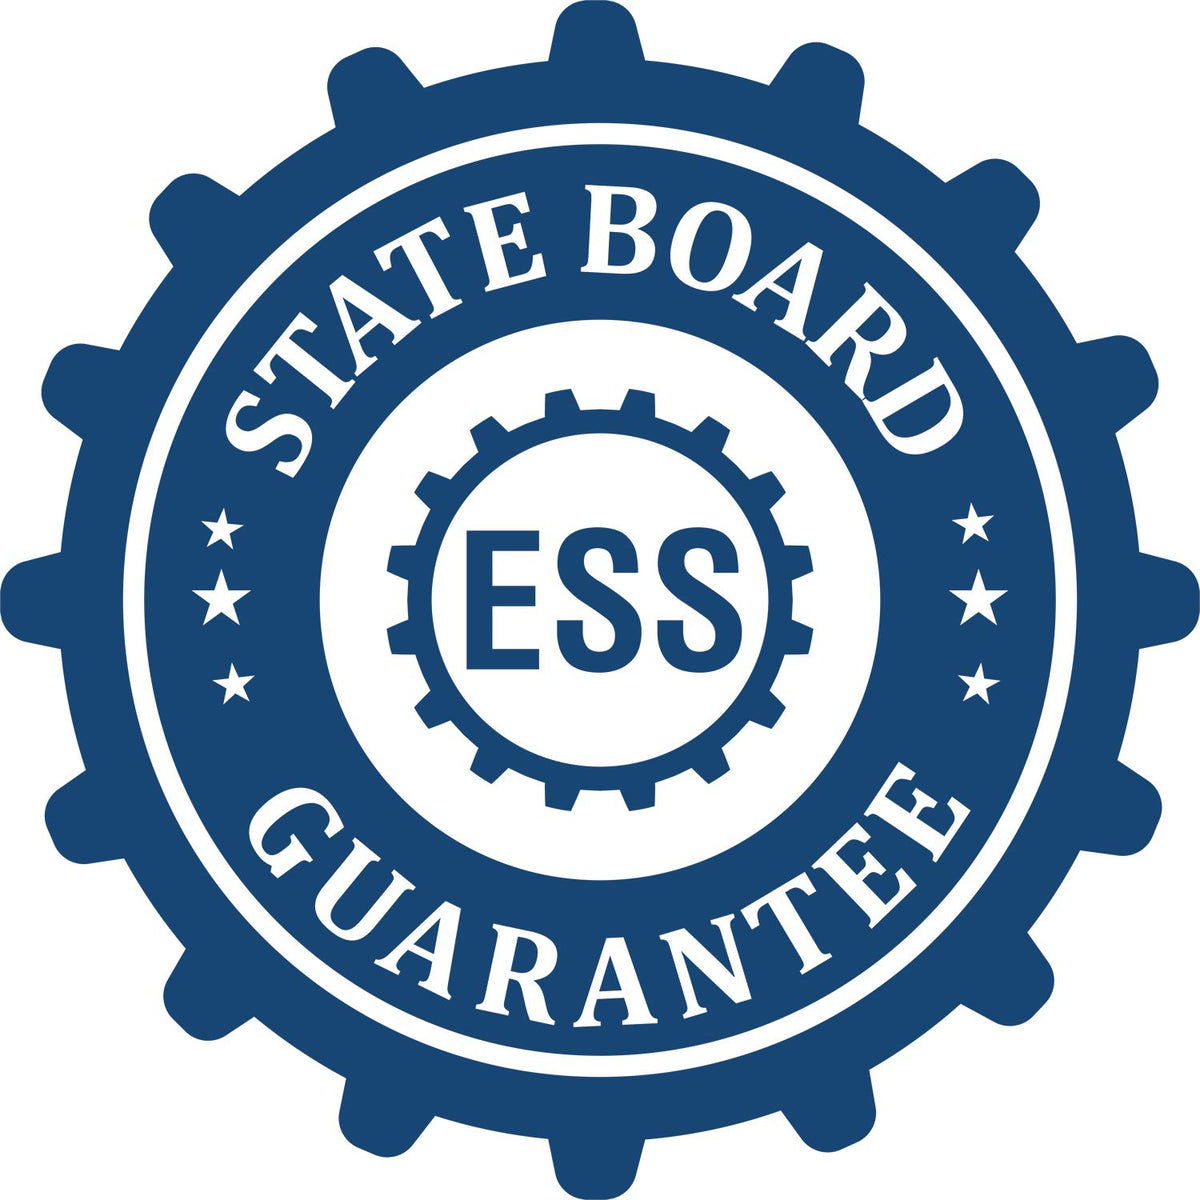 An emblem in a gear shape illustrating a state board guarantee for the Heavy Duty Cast Iron Colorado Architect Embosser product.